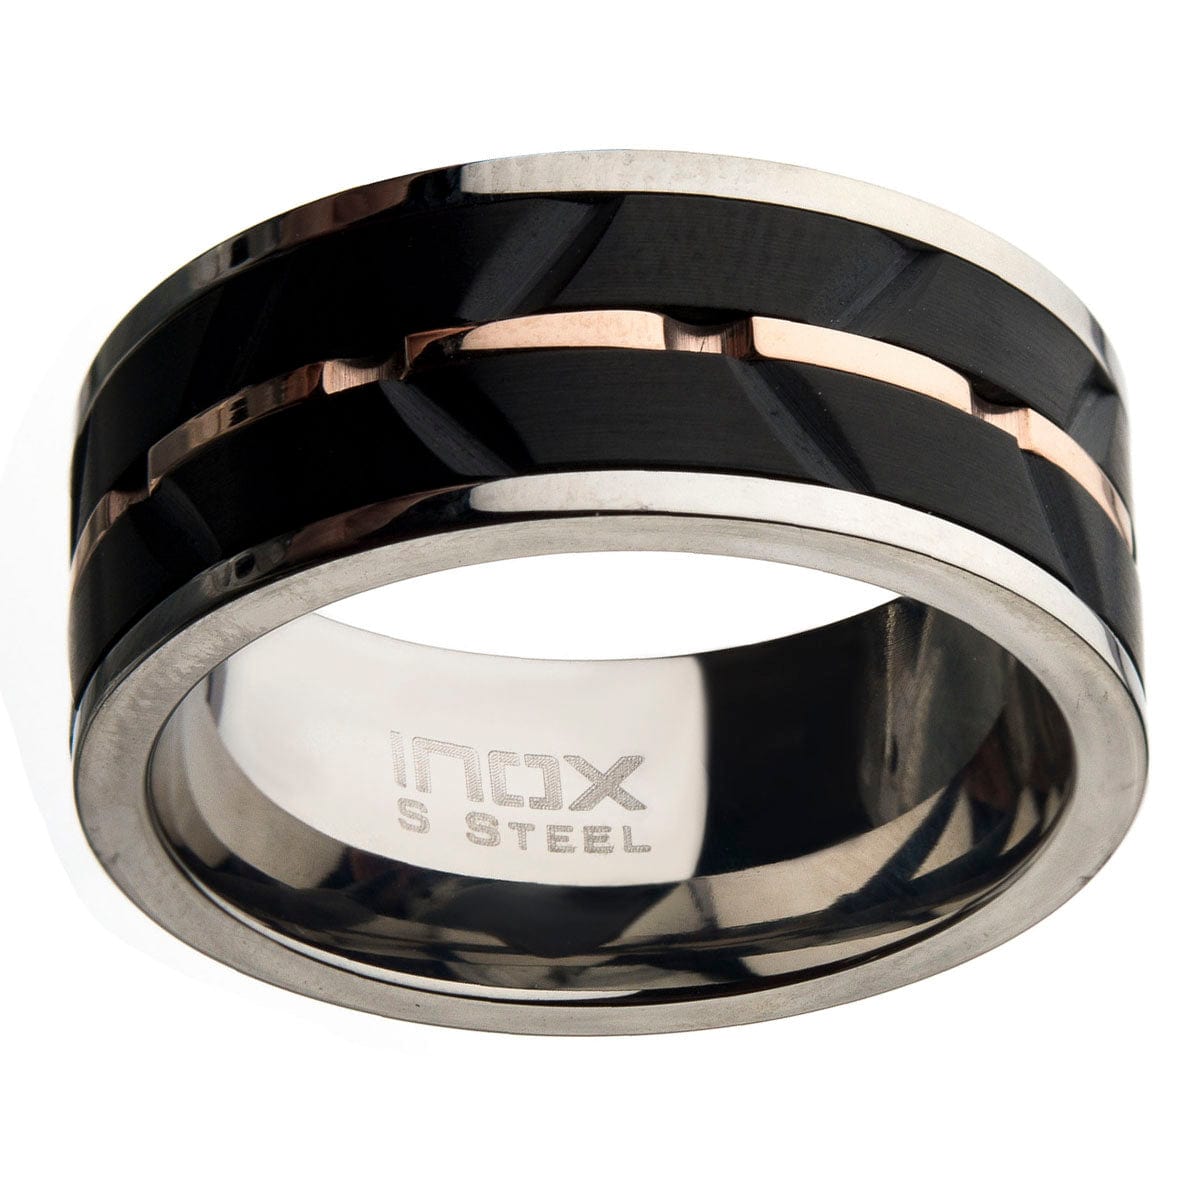 INOX JEWELRY Rings Black and Rose Tone Stainless Steel Matte Finish Raised Wave Accent Inlaid Band Ring